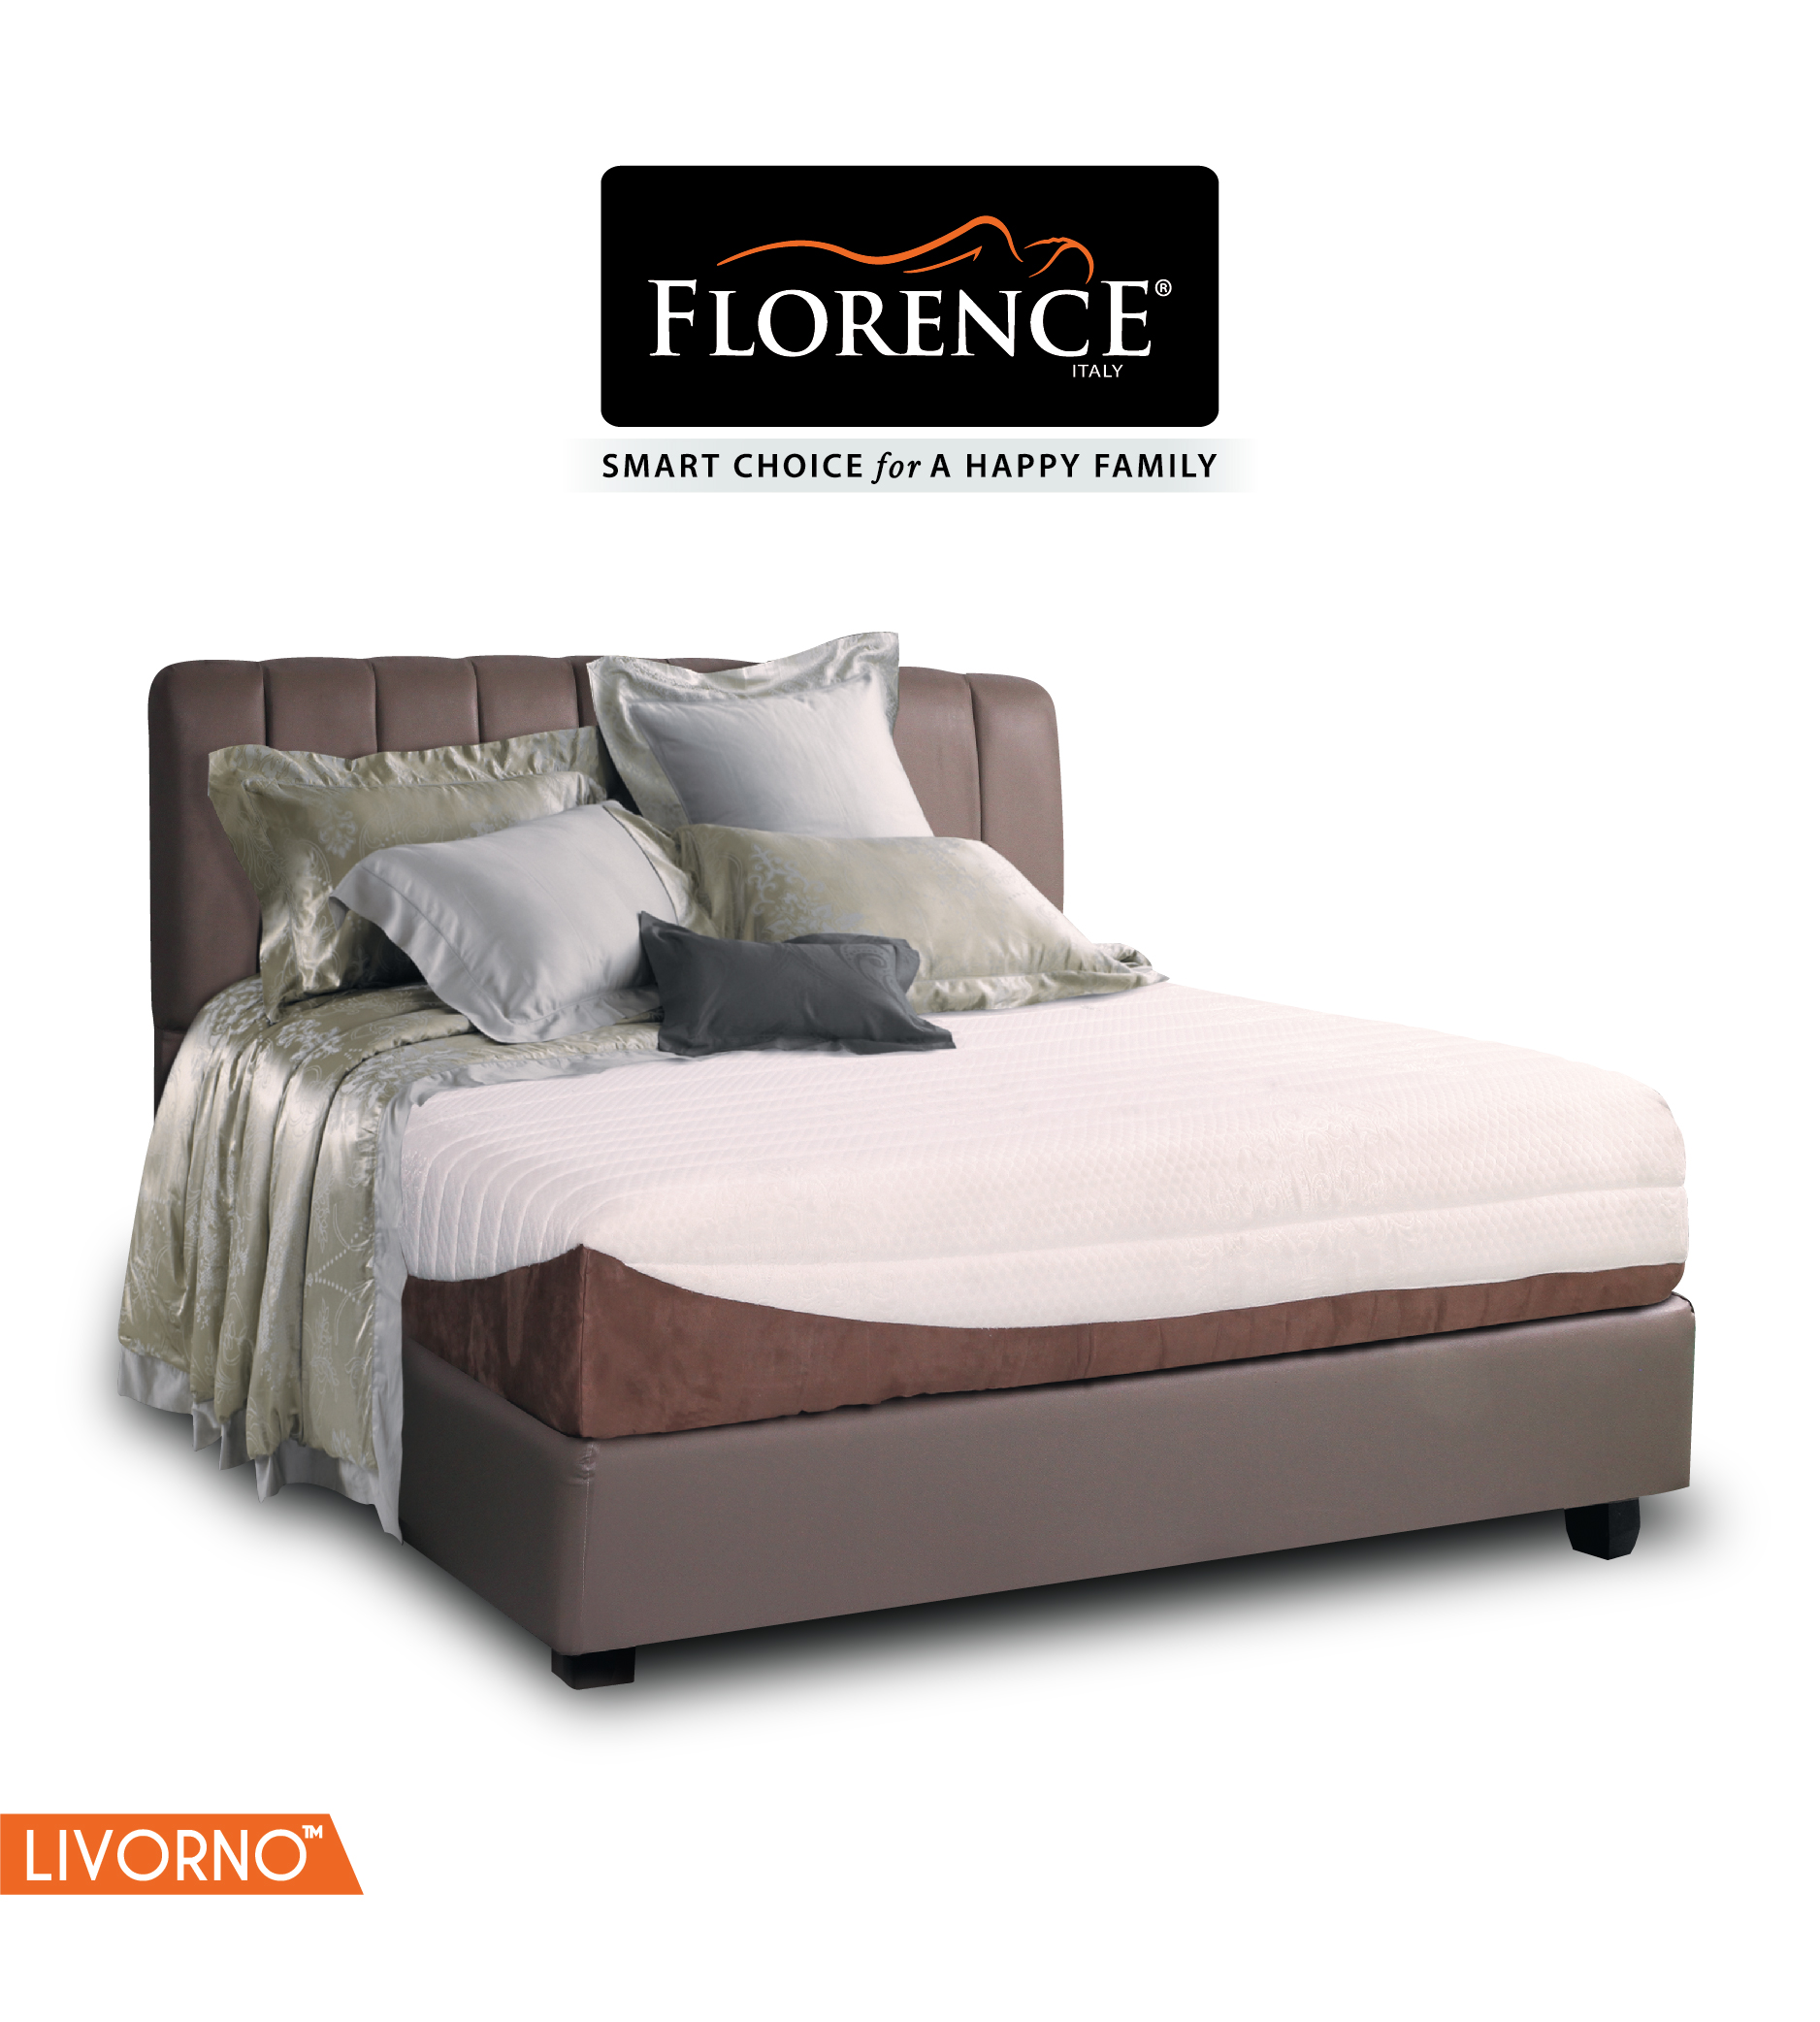 Florence Latex Bed Livorno - Mattress Only